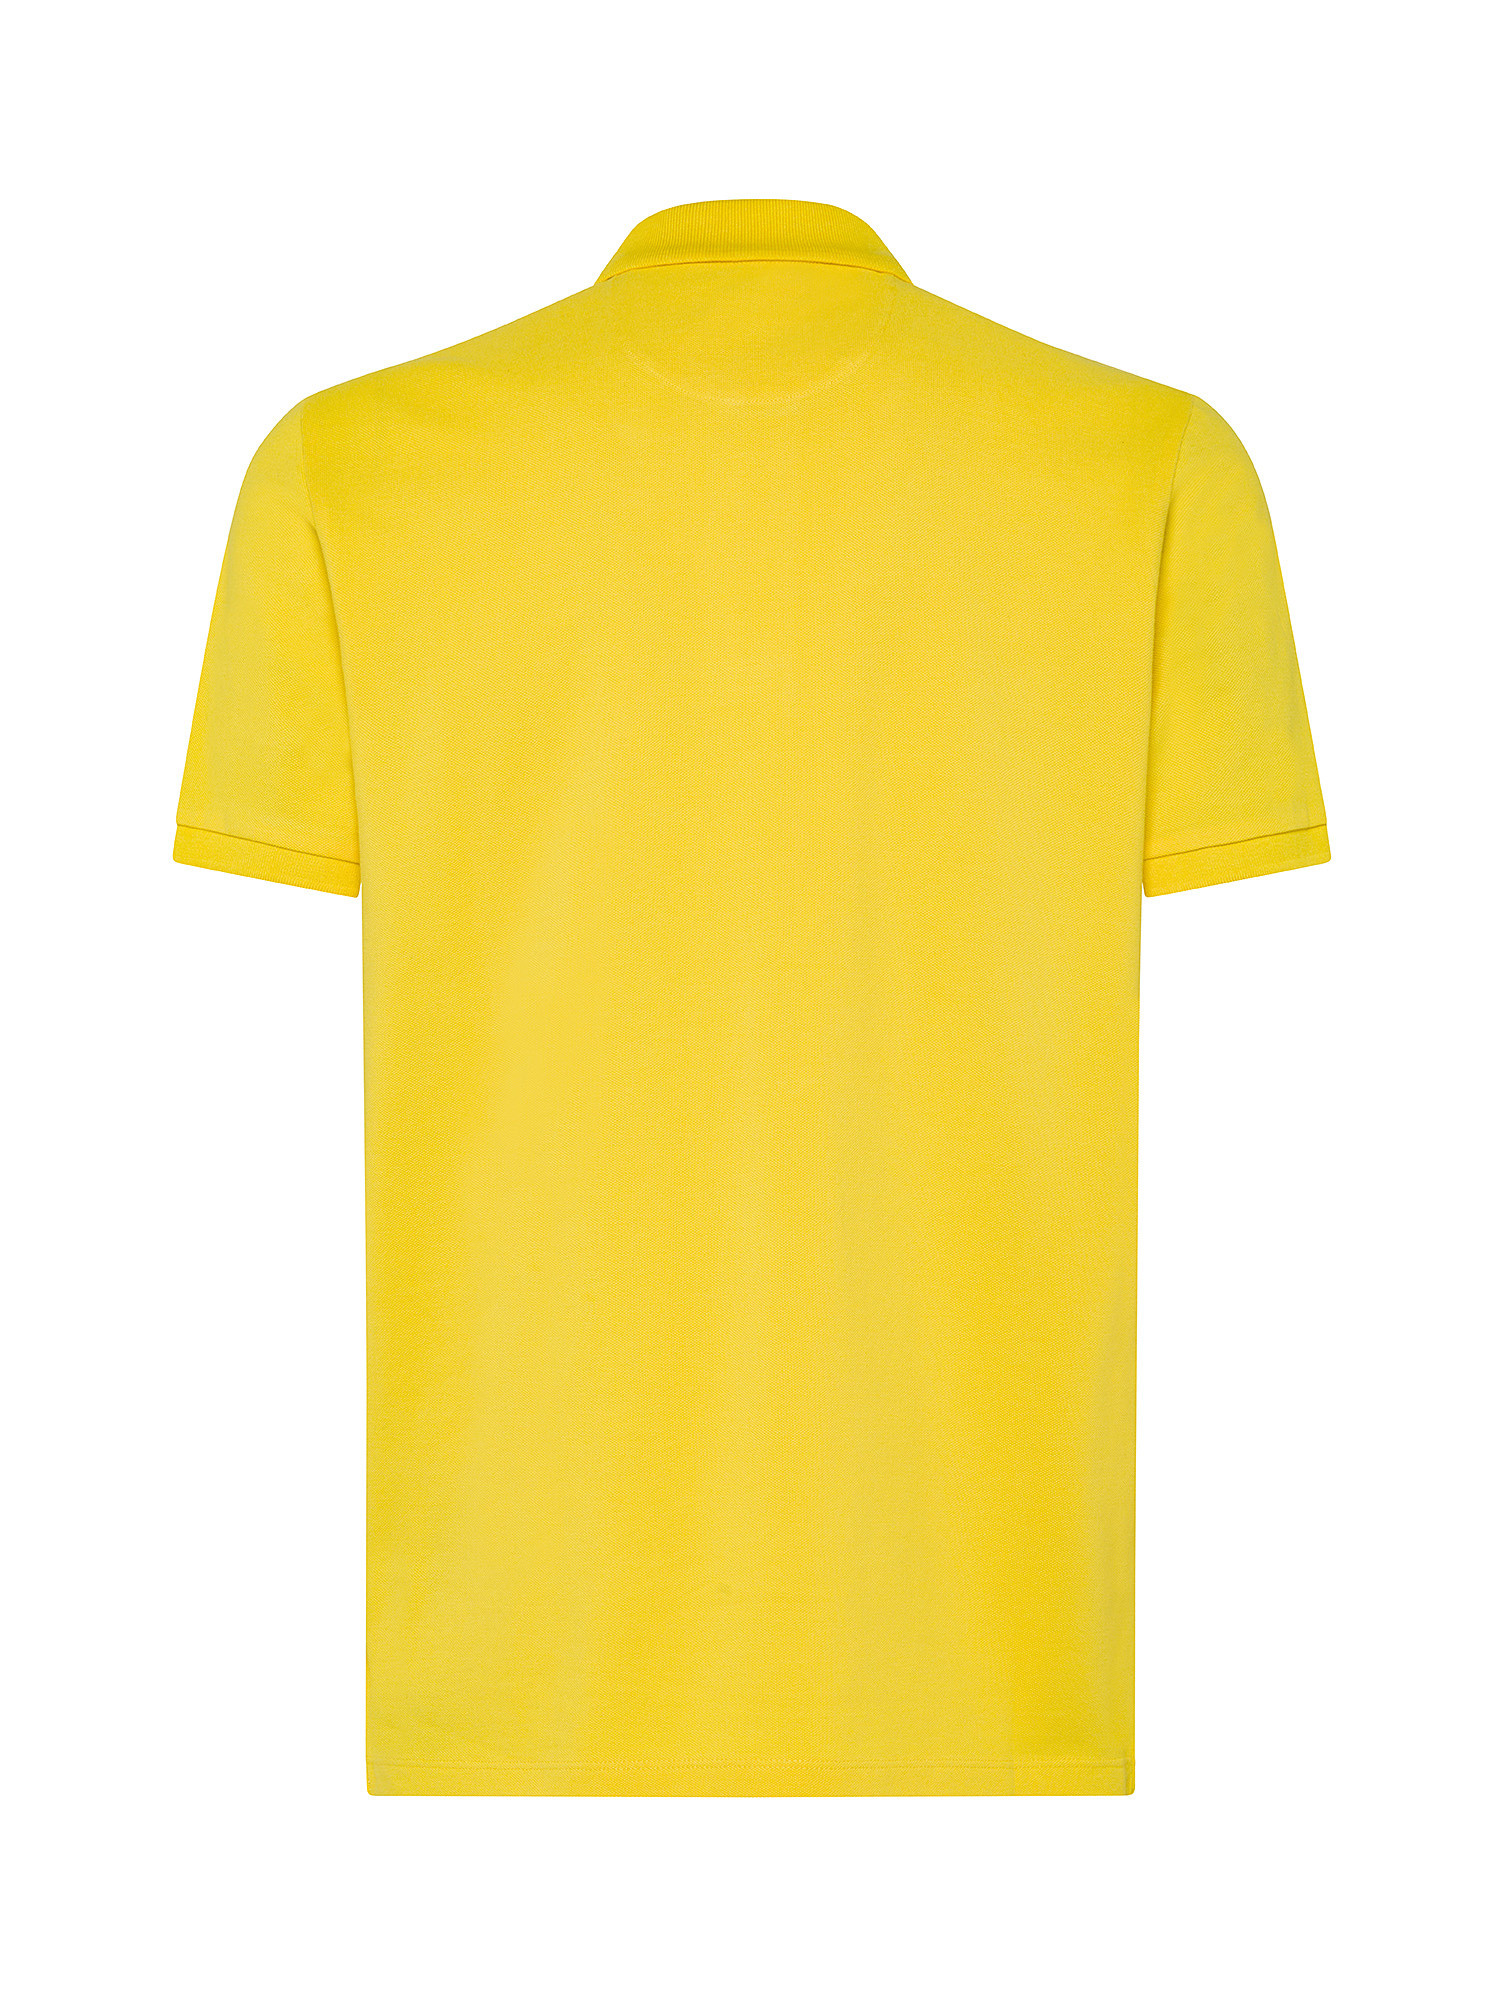 Luca D'Altieri - Polo in pure cotton, Yellow, large image number 1